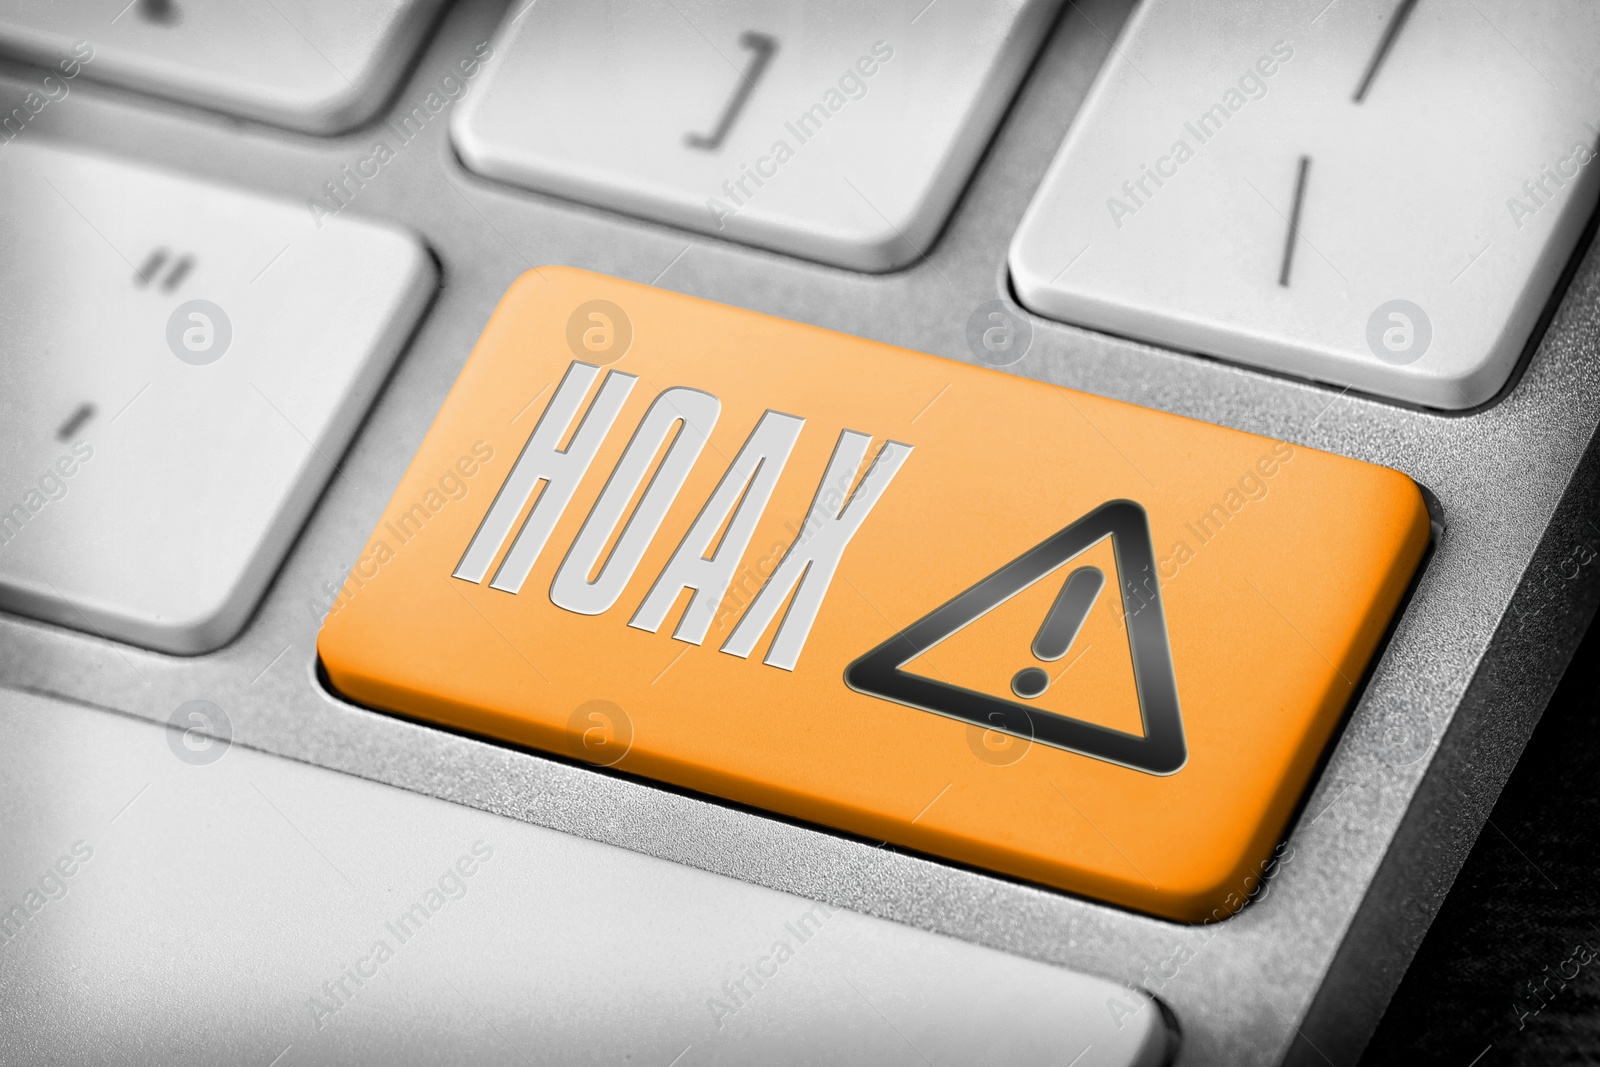 Image of Orange button with word Hoax and warning sign on computer keyboard, closeup